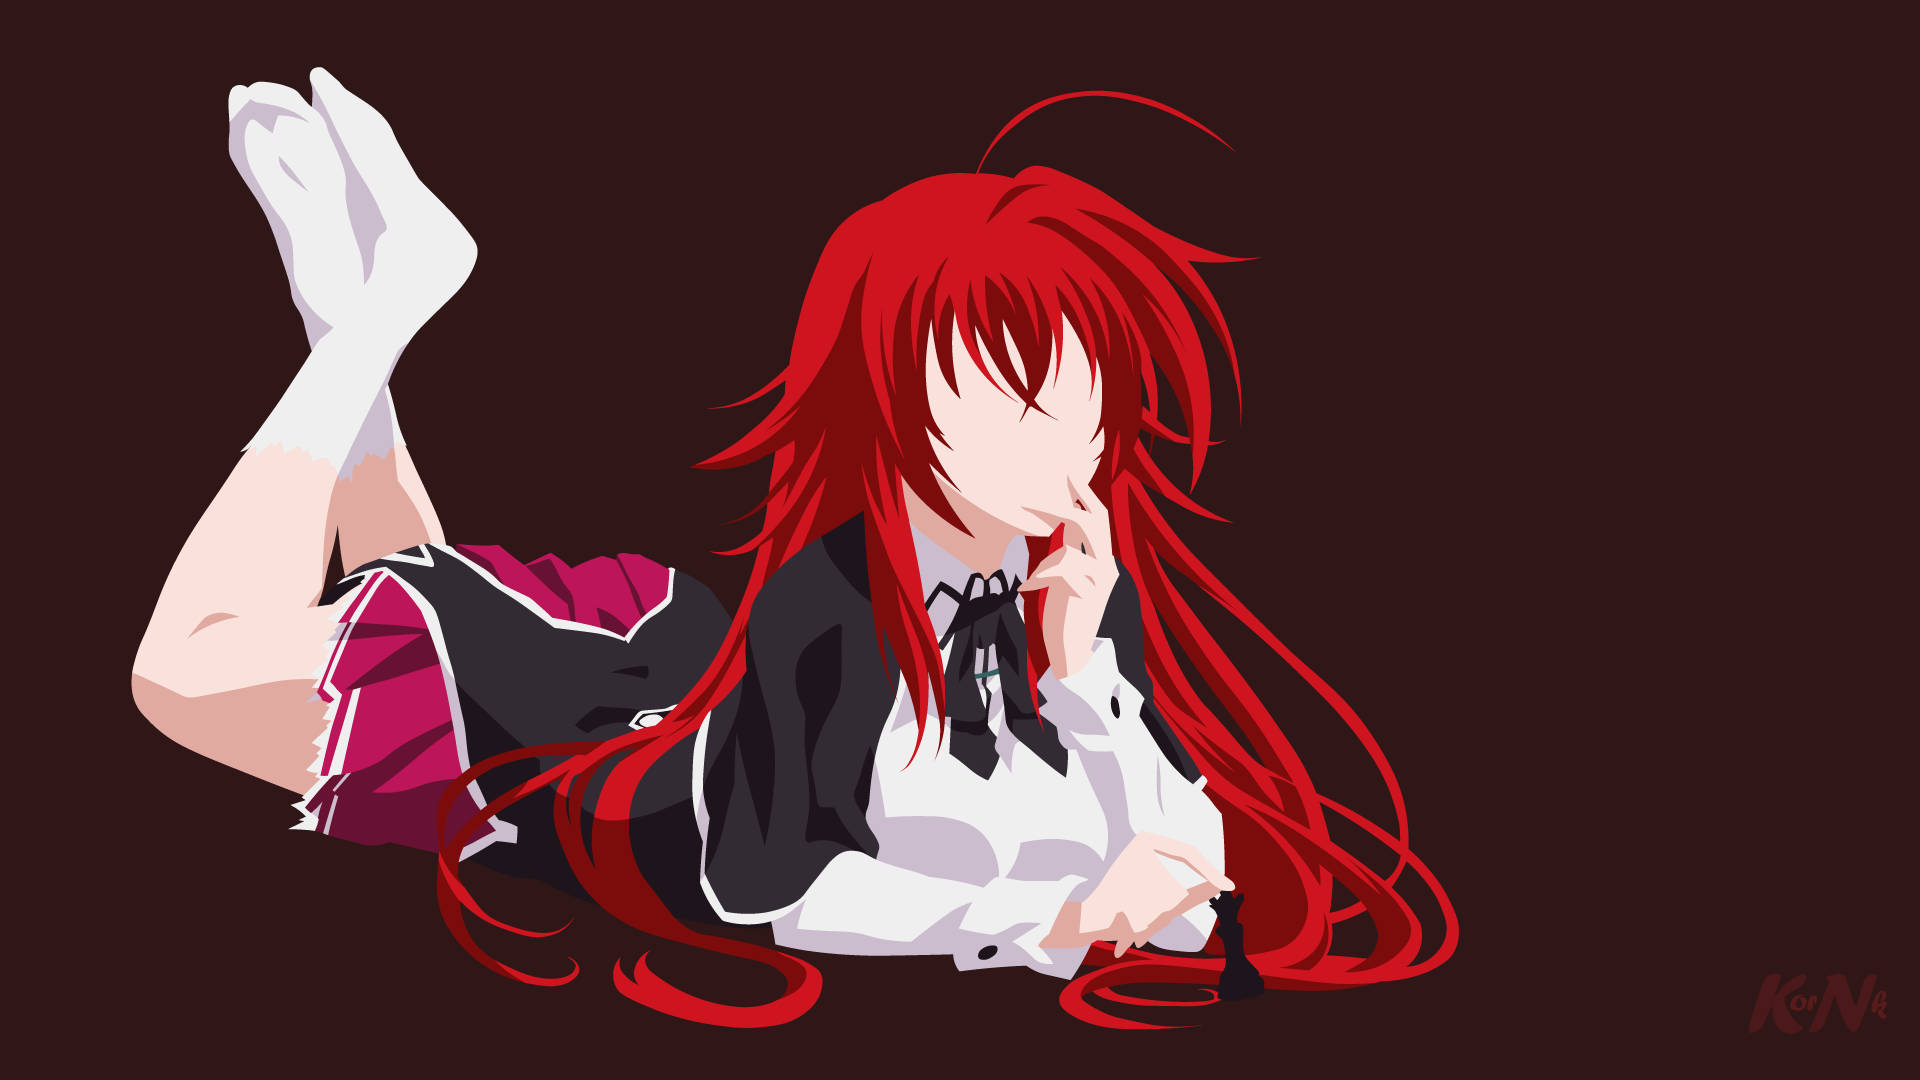 A minimalistic take on Rias from the popular anime series Highschool DxD Wallpaper